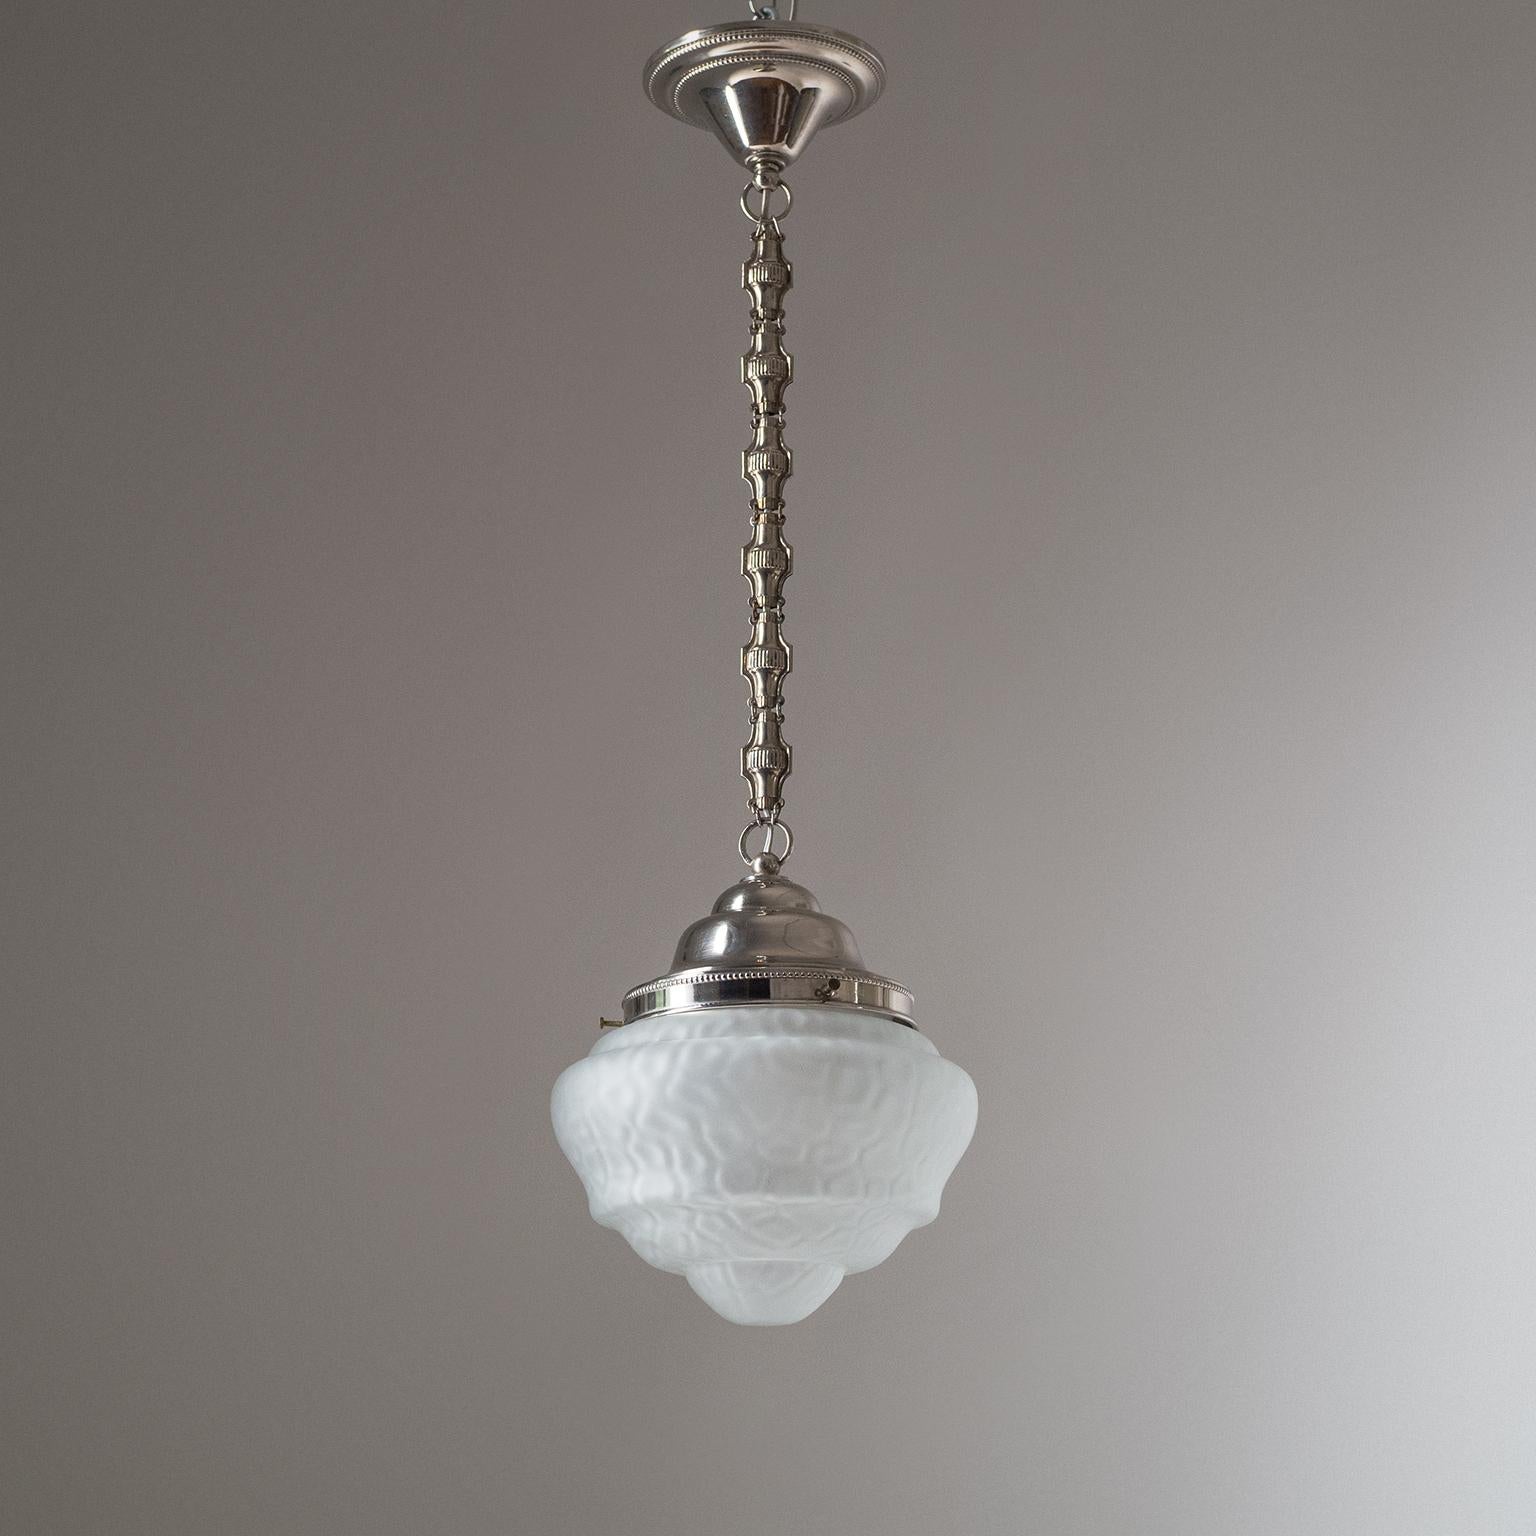 Magnificent Art Deco pendant from the early days of the 20th century. A very rare satin glass diffuser with a softly tiered silhouette and a unique animal skin-like texture is suspended by nikeled brass hardware. Beautiful original condition with a